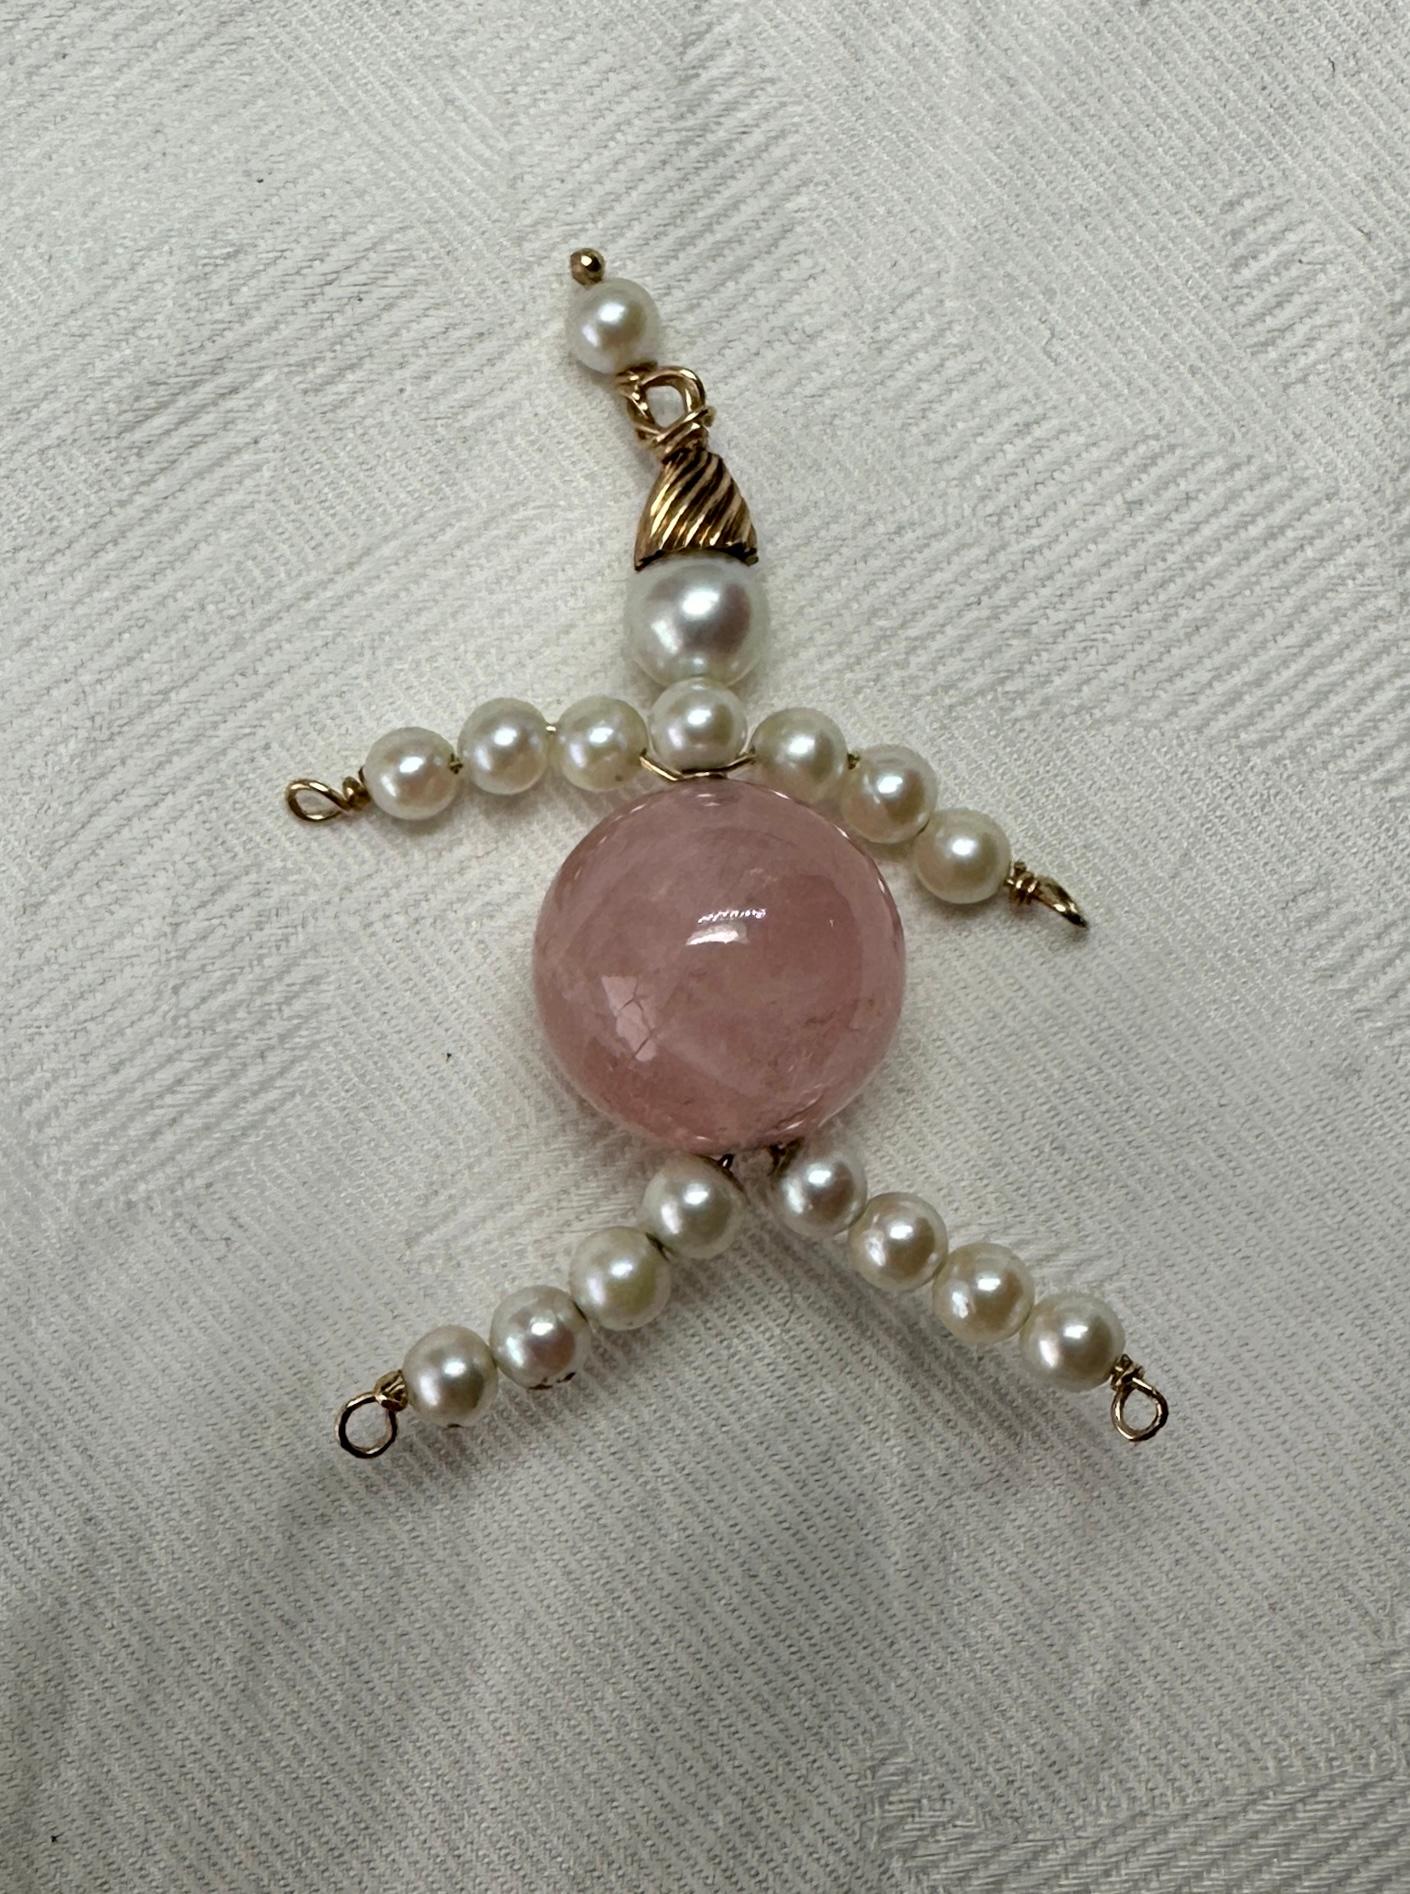 Lady Man Pendant Charm Rose Quartz Pearl 14 Karat Gold Antique Retro In Excellent Condition For Sale In New York, NY